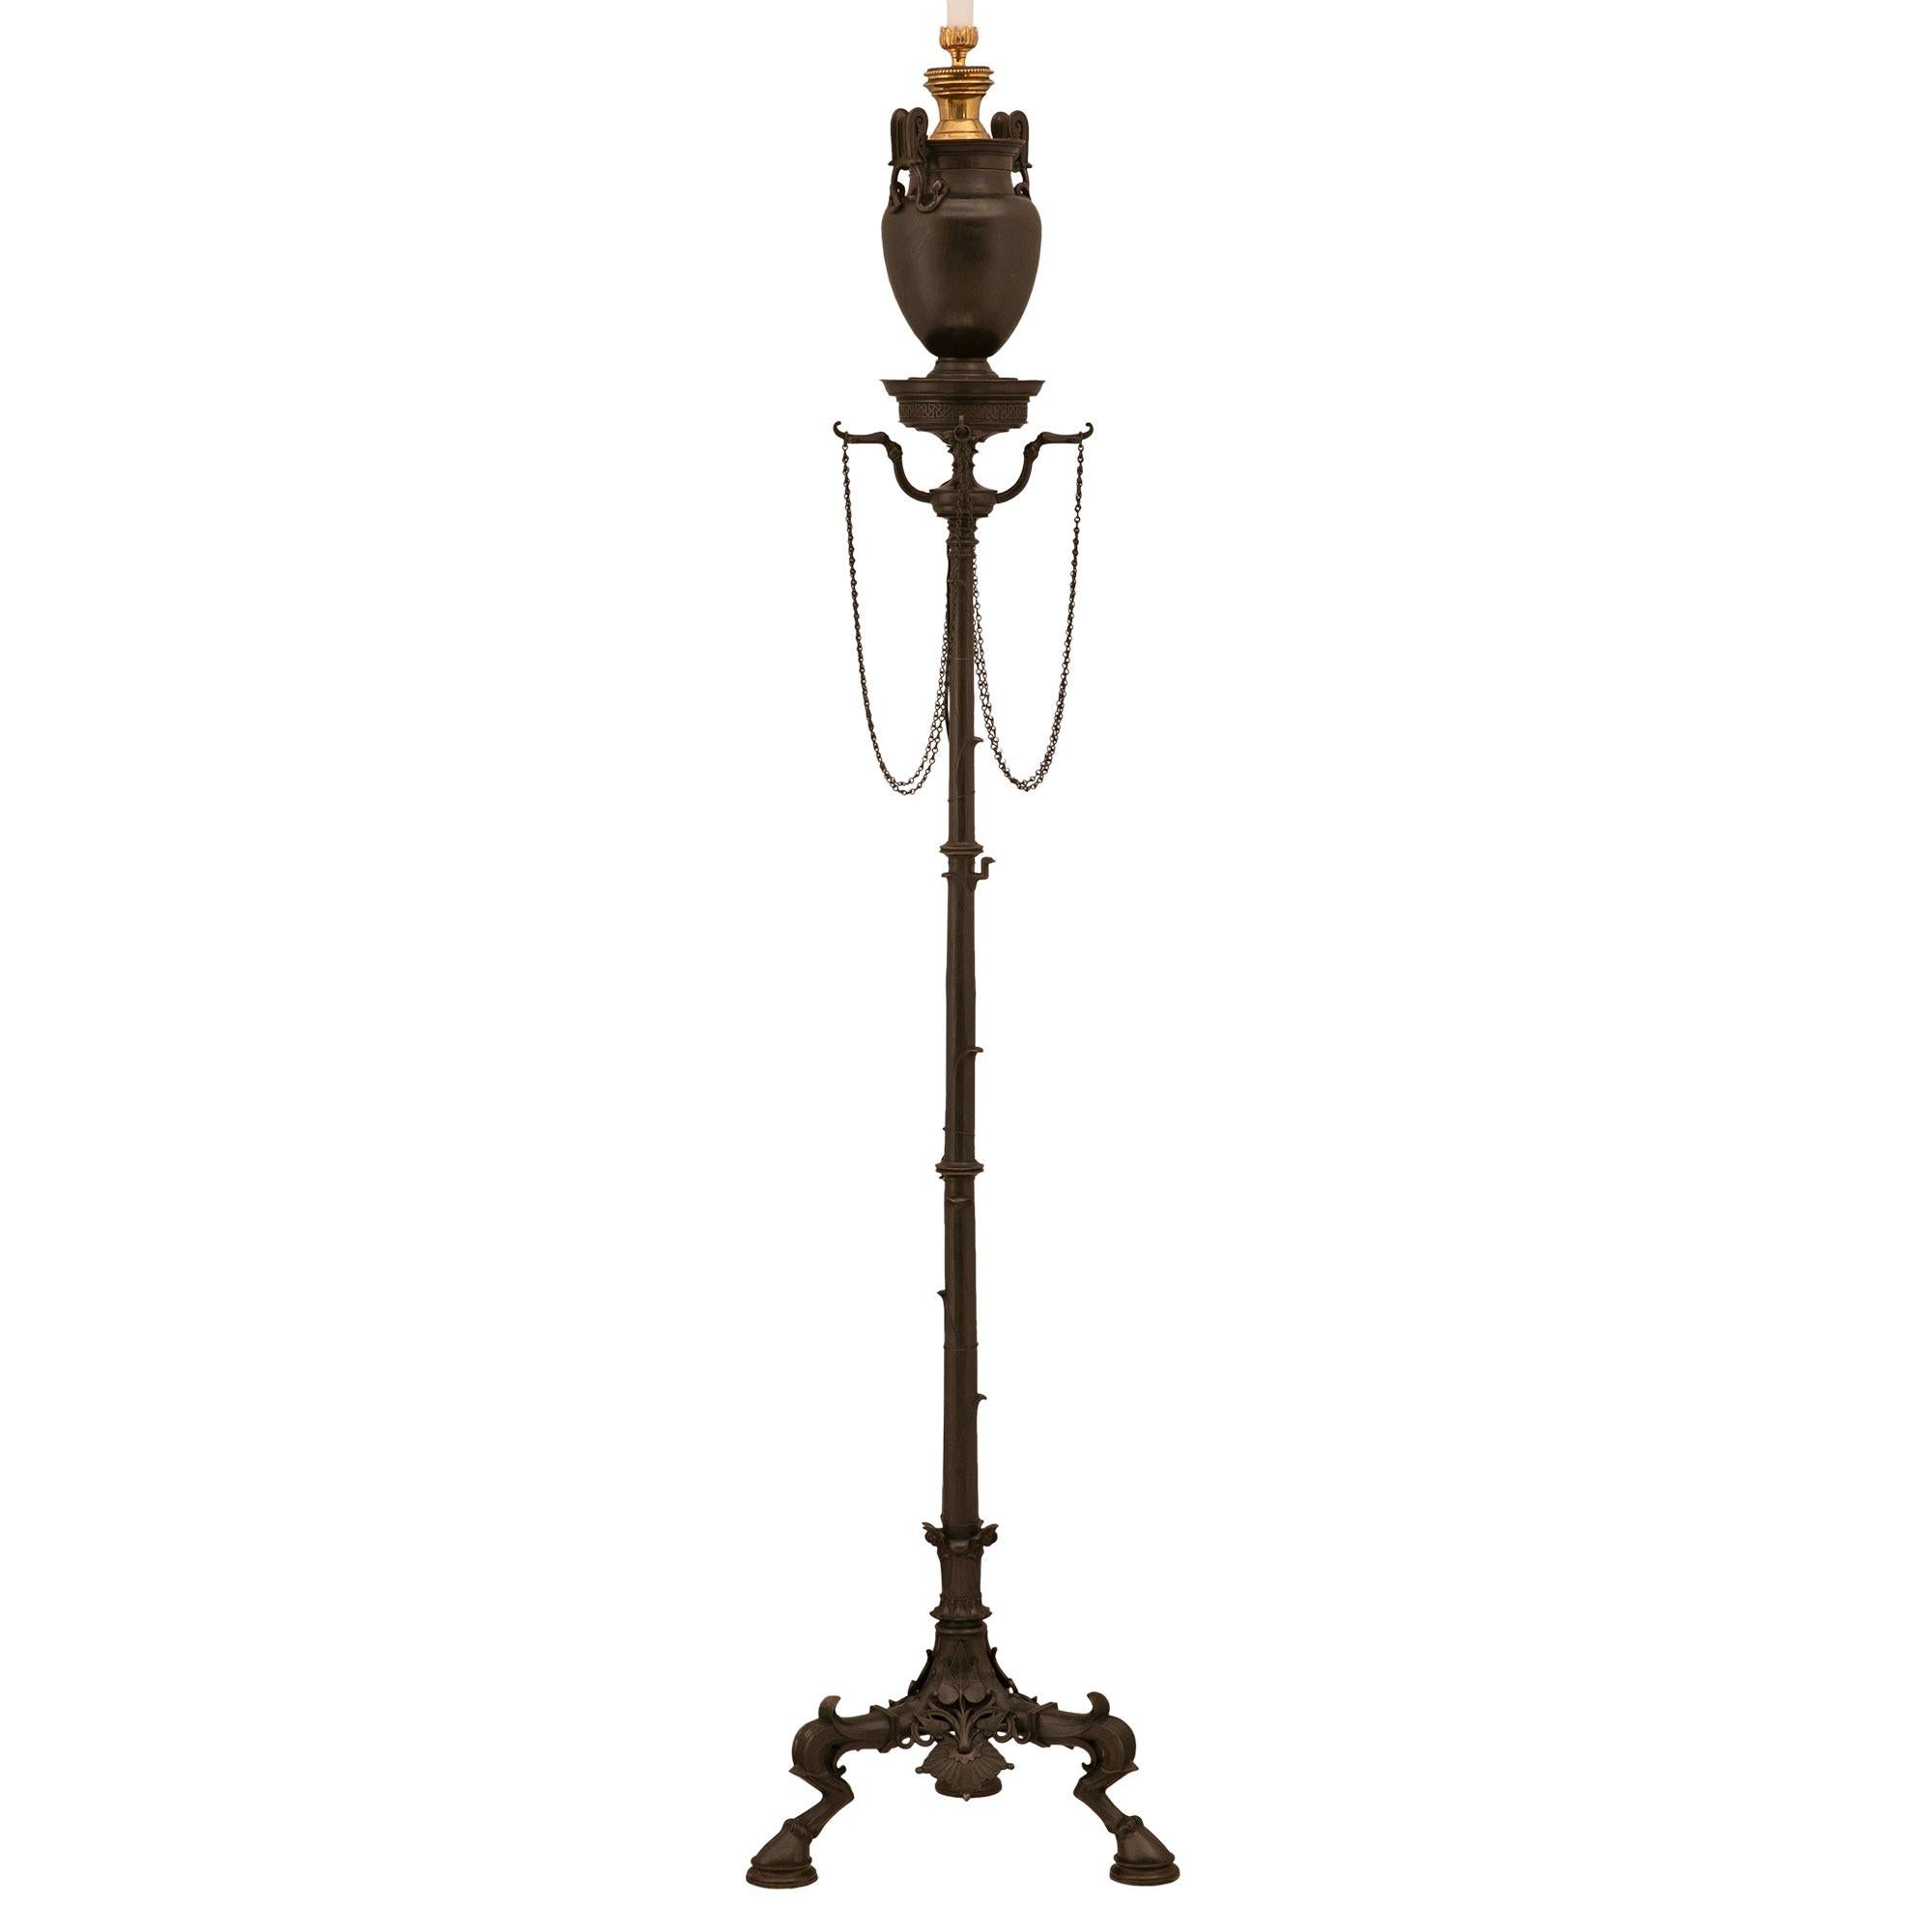 Patinated French Mid-19th Century Neoclassical Style Solid Bronze and Ormolu Floor Lamp For Sale